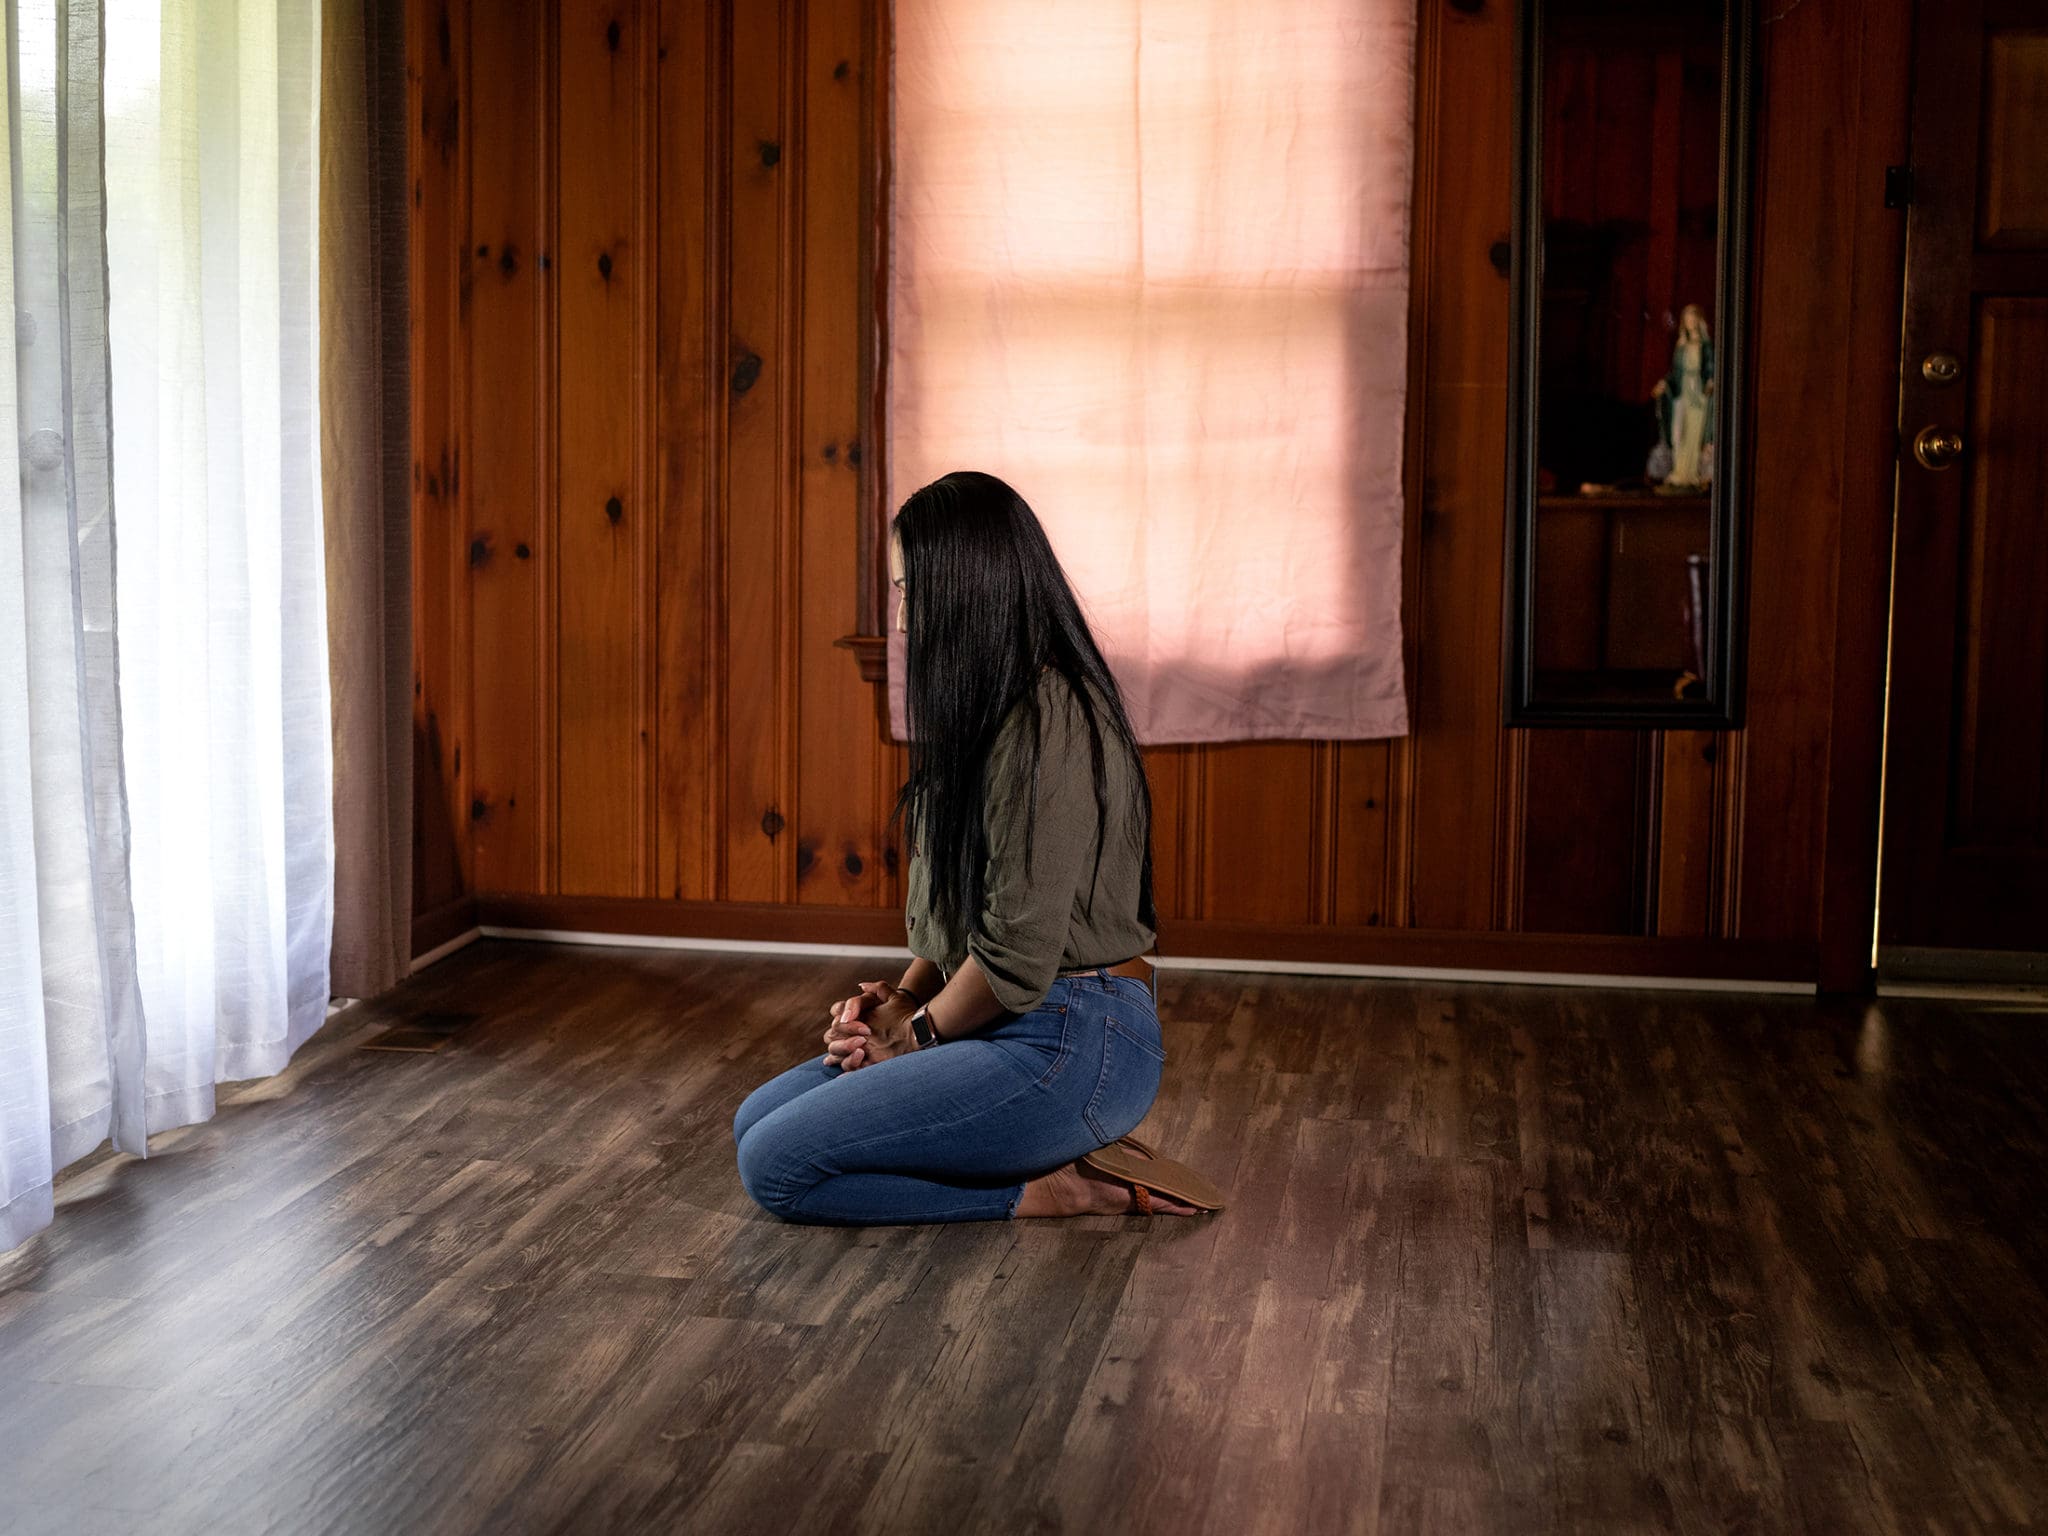 Brenda prays in a room at her home near the statue of Our Lady of Grace. The statue was brought by the Legion of Mary as part of their Pilgrim Virgin Statue Home Visitation Program. Legion members helped her family during a time of need. Photo by Johnathon Kelso